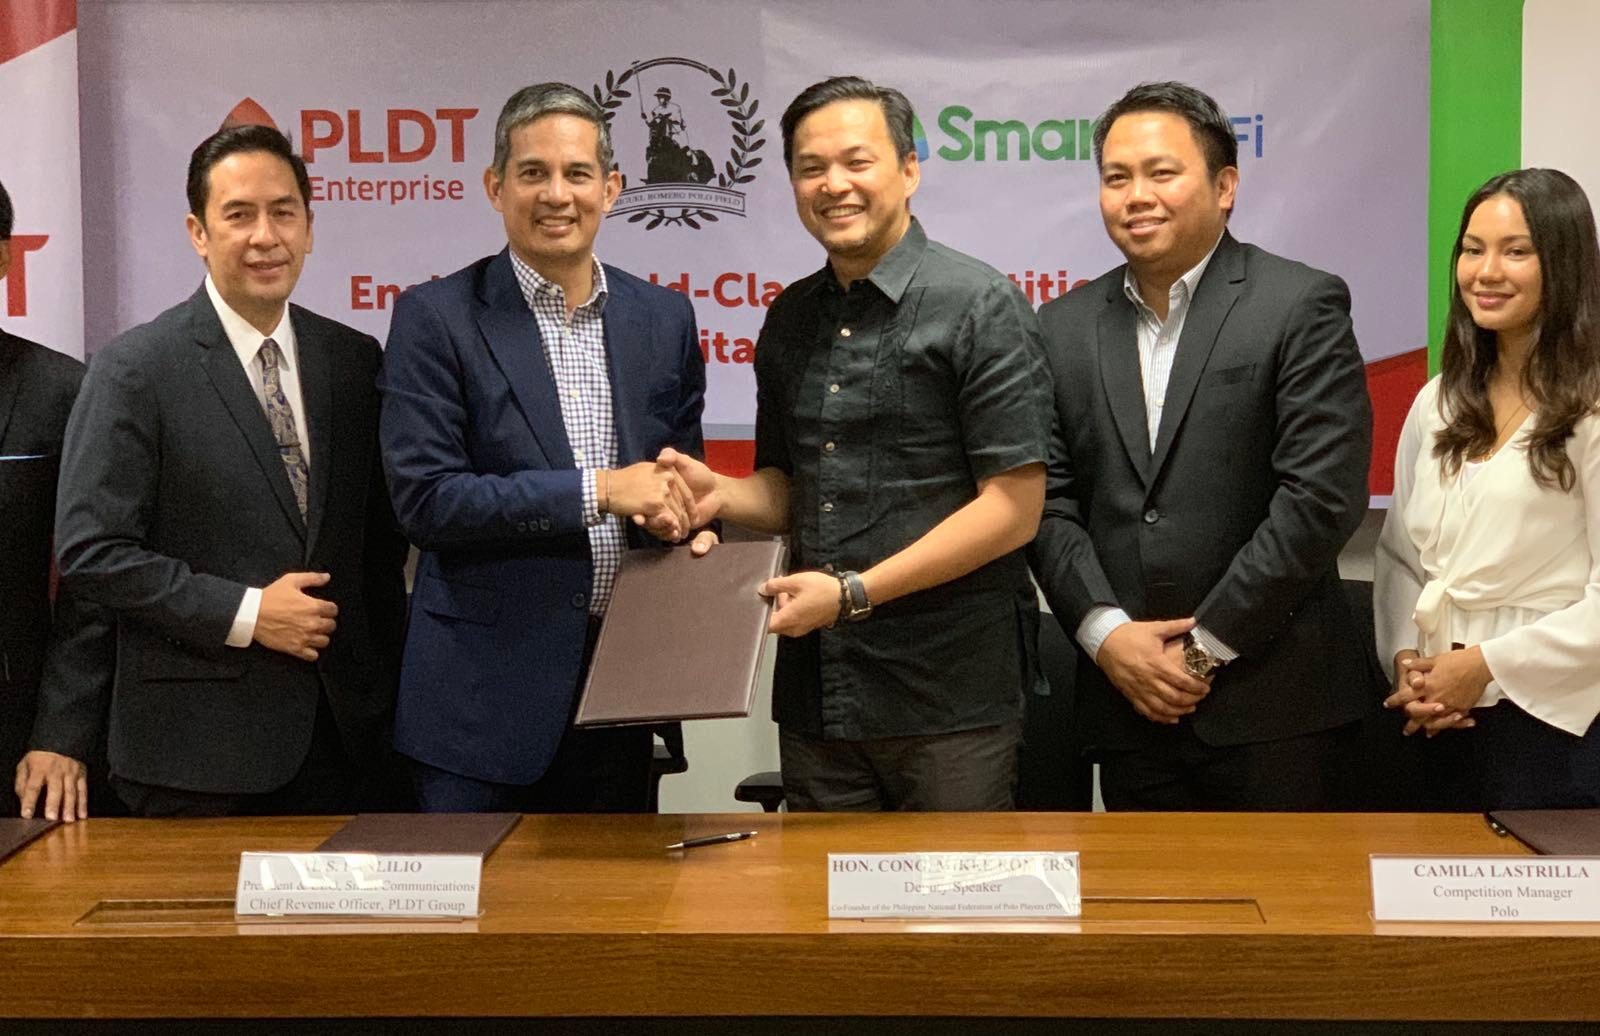 PARTNERSHIP. Deputy House Speaker and PNFPP founding director Mikee Romero (third from left) and PLDT chief revenue officer Al Panlilio (second from left) seal the agreement to install free Wi-Fi at the Miguel Romero Field during the SEA Games. Also shown (from left) are ePLDT president Jovy Hernandez, AirAsia executive Erick Arejola and polo competition manager Camila Lastrilla.  